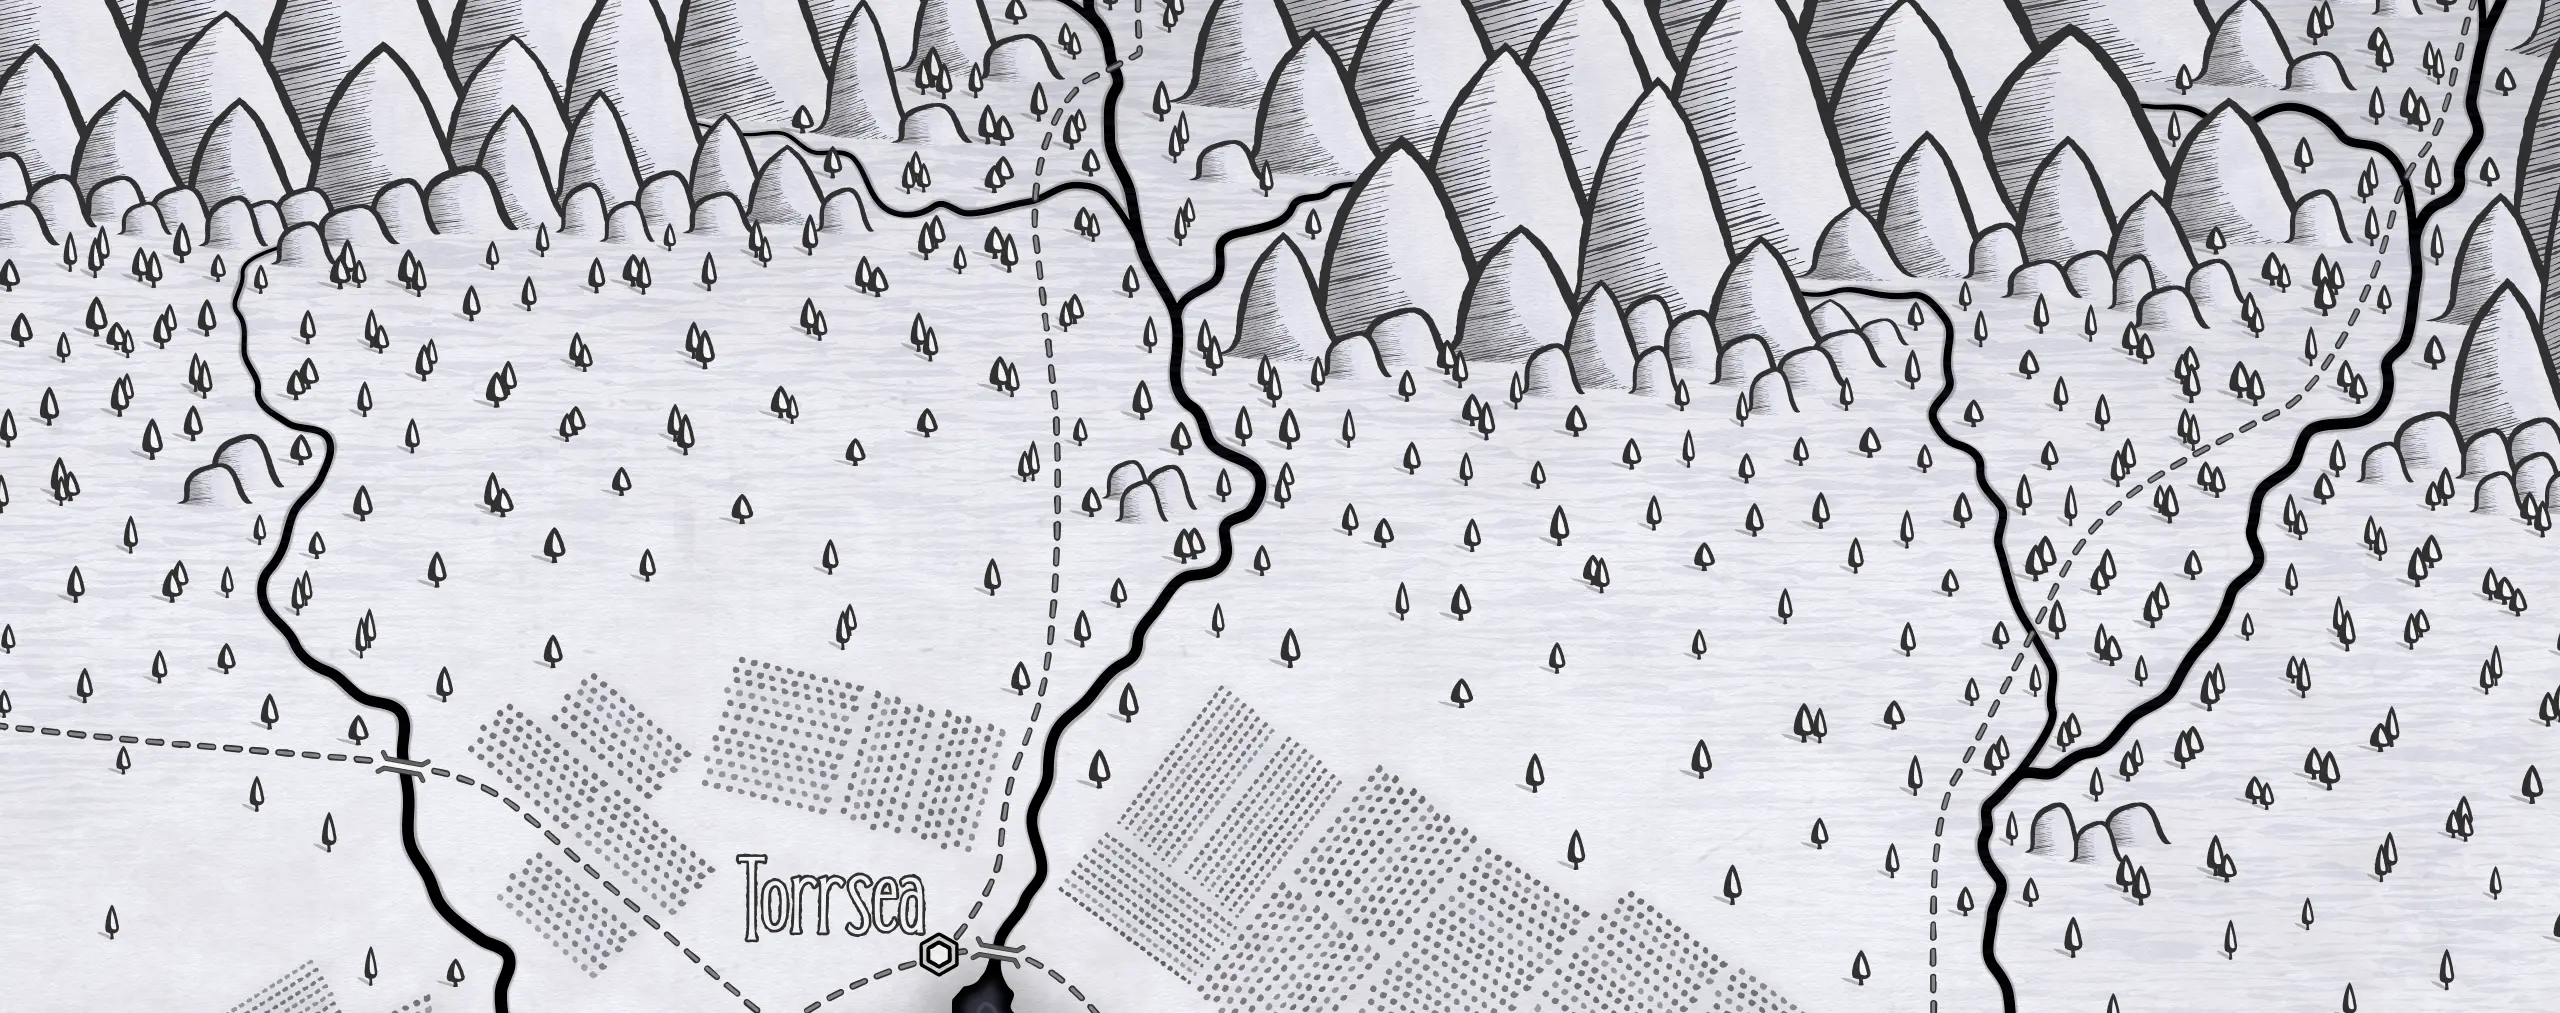 A snippet of a monochrome fantasy map showing some towns, farmlands and mountains to the rear.